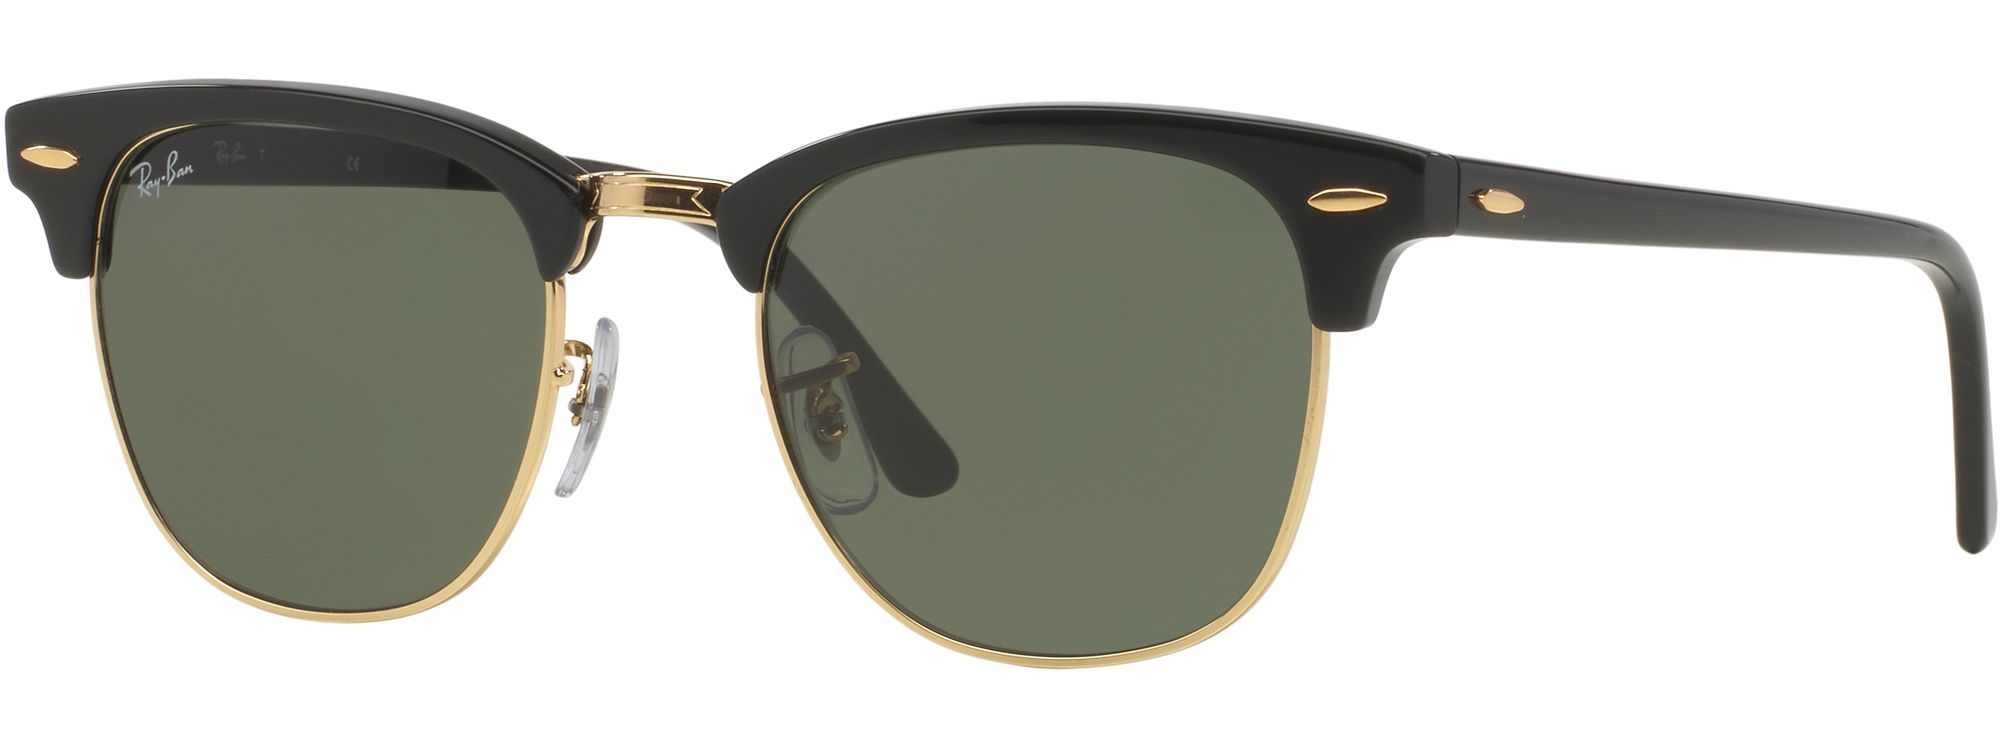 Photos - Sunglasses Ray-Ban Clubmaster Classic , Men's, Black Green | Father's Day G 